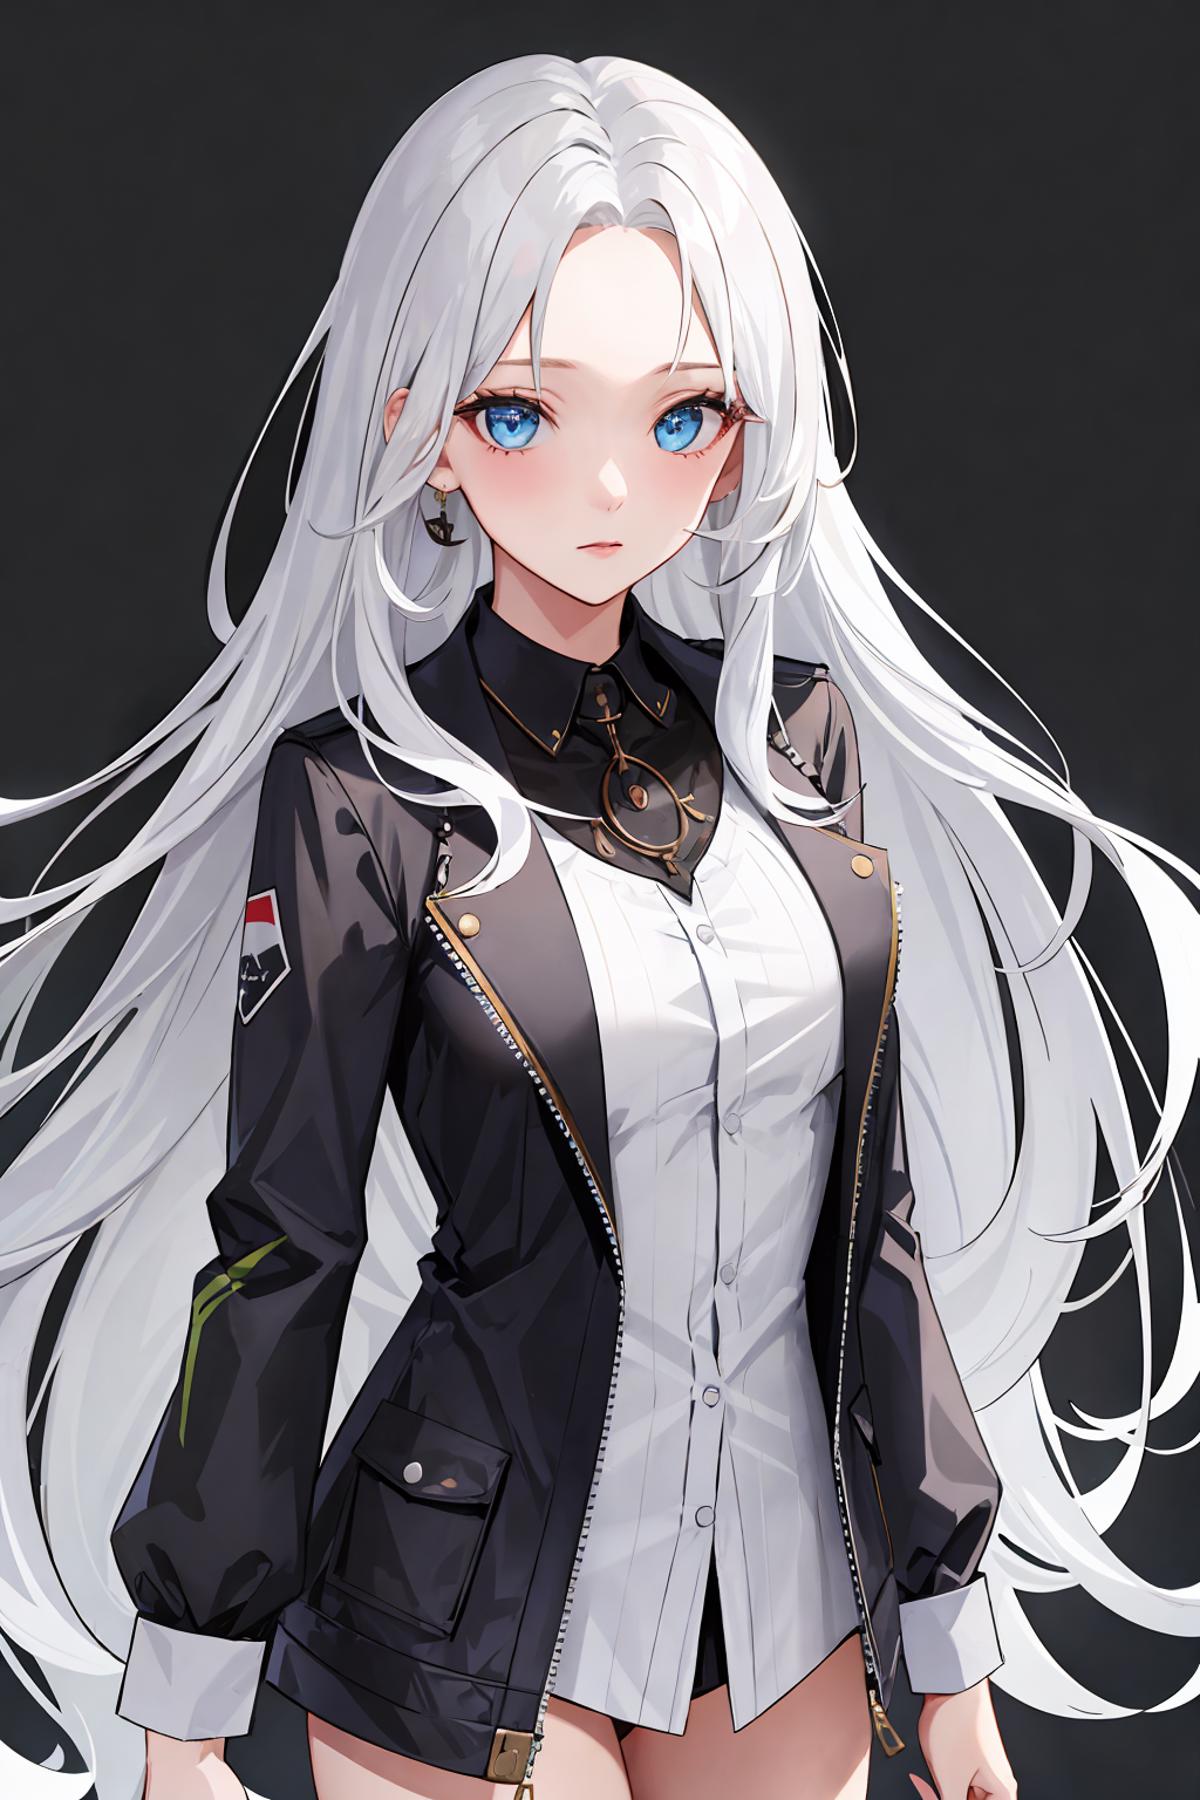 AI model image by MoYou